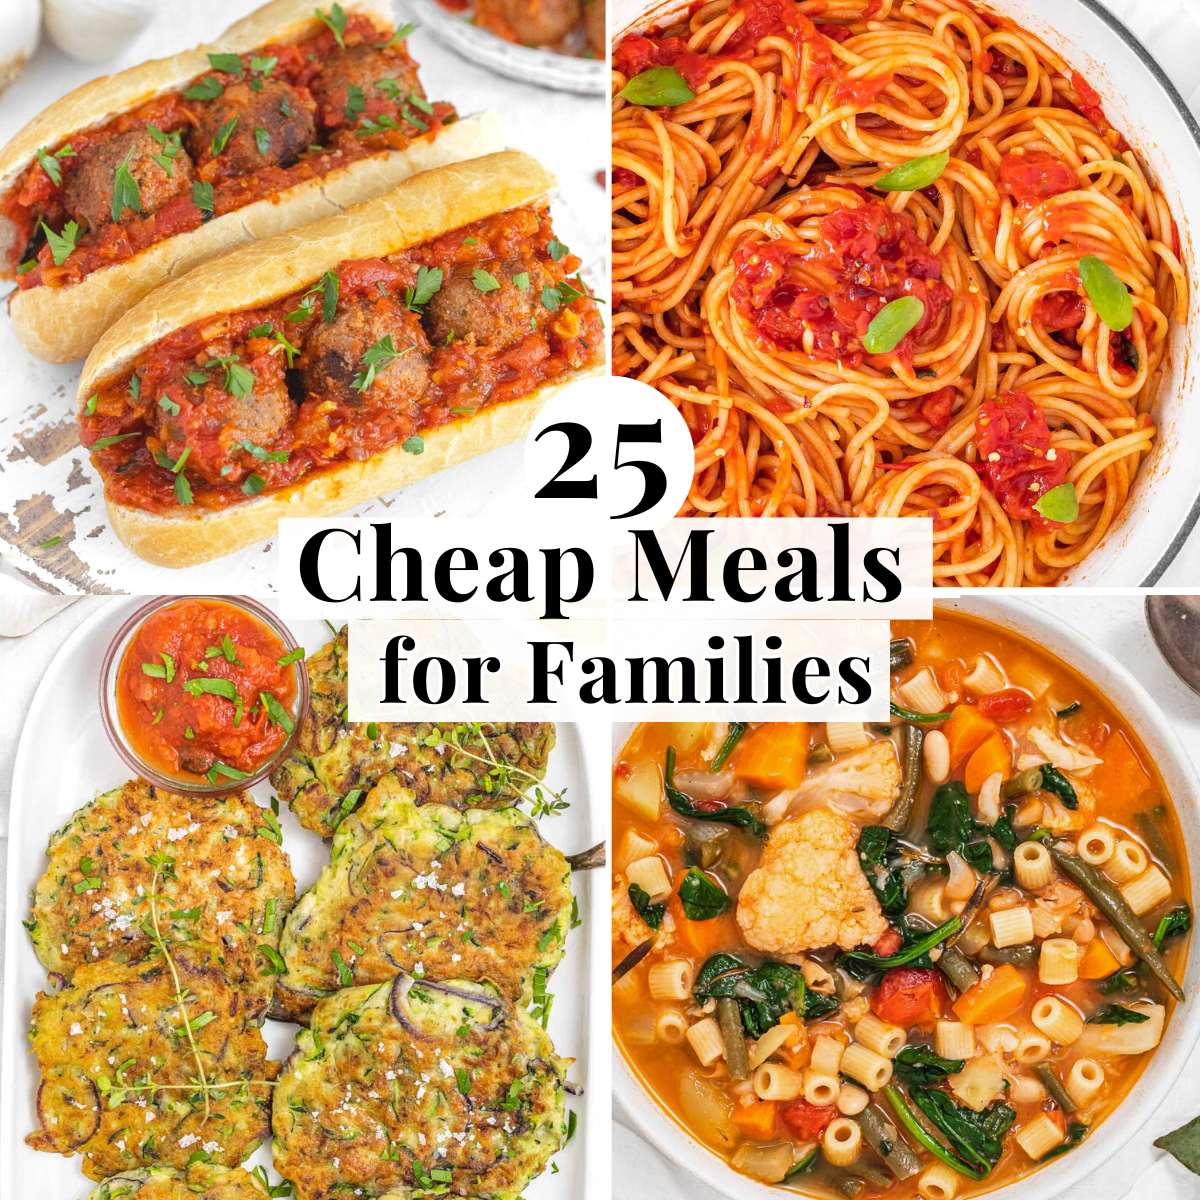 ) Discounted meal staples